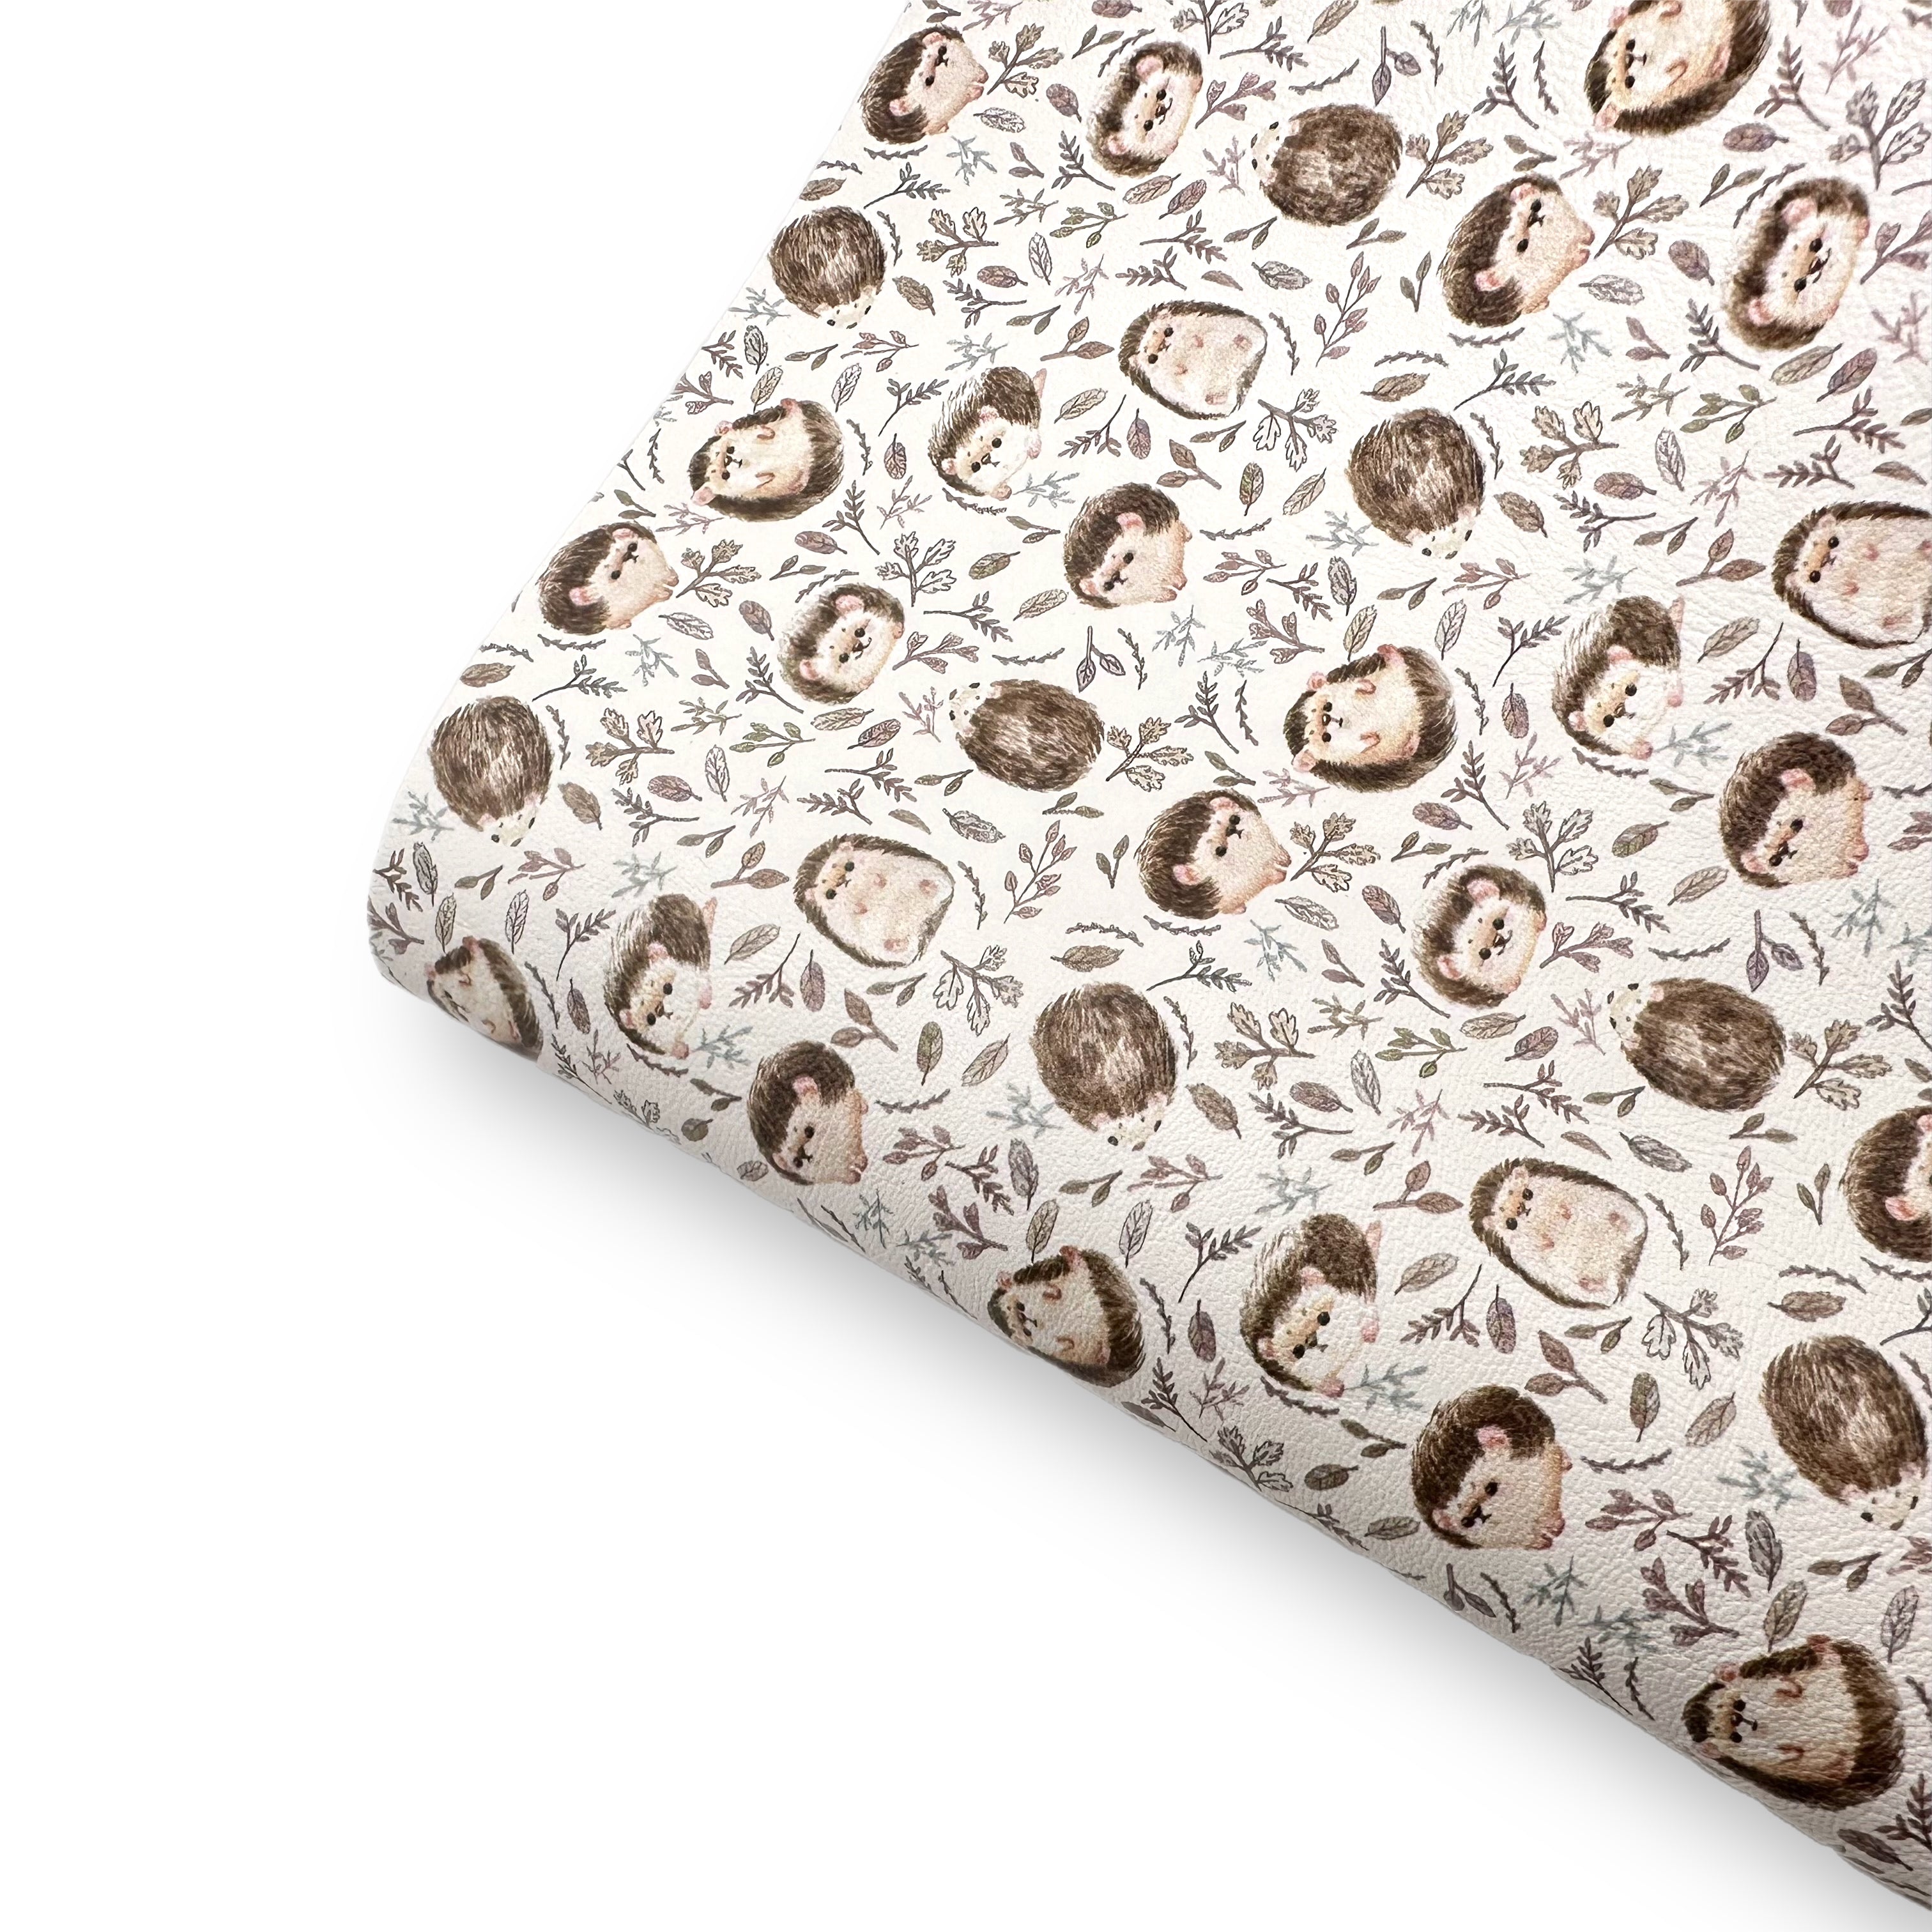 Baby Hedgehogs Premium Faux Leather Fabric Sheets